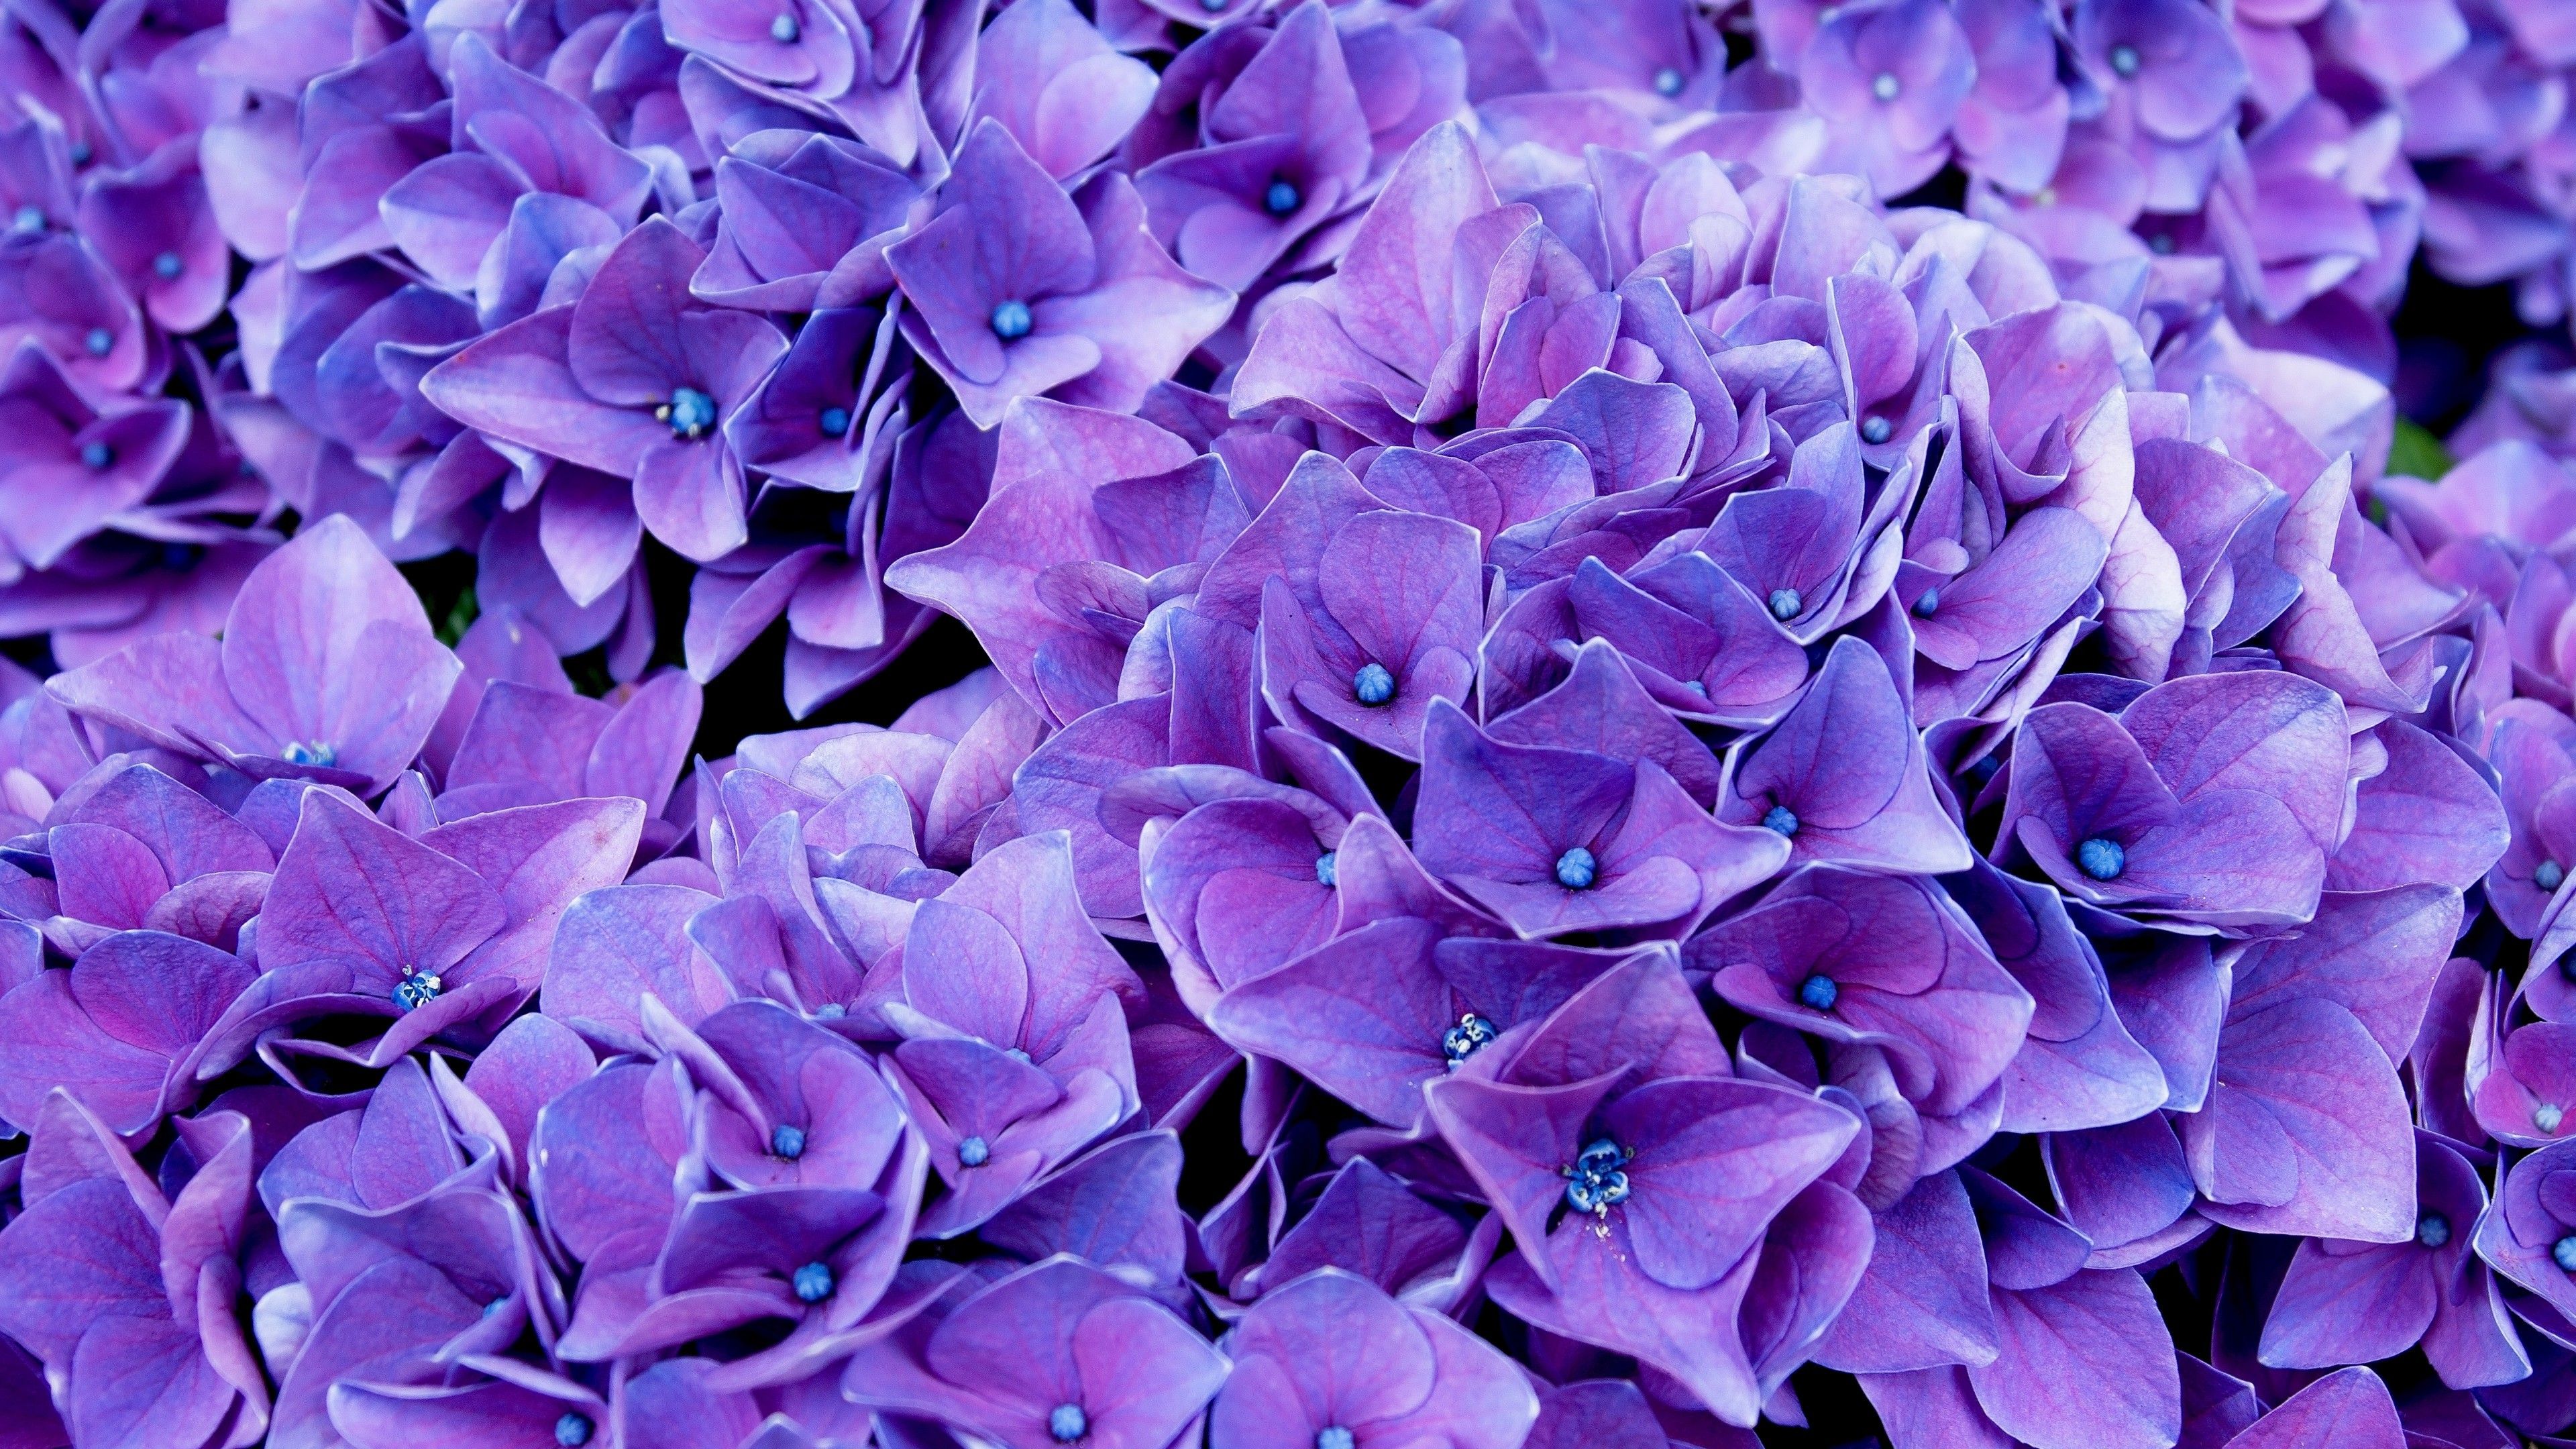 Lilac 4K wallpaper for your desktop or mobile screen free and easy to download